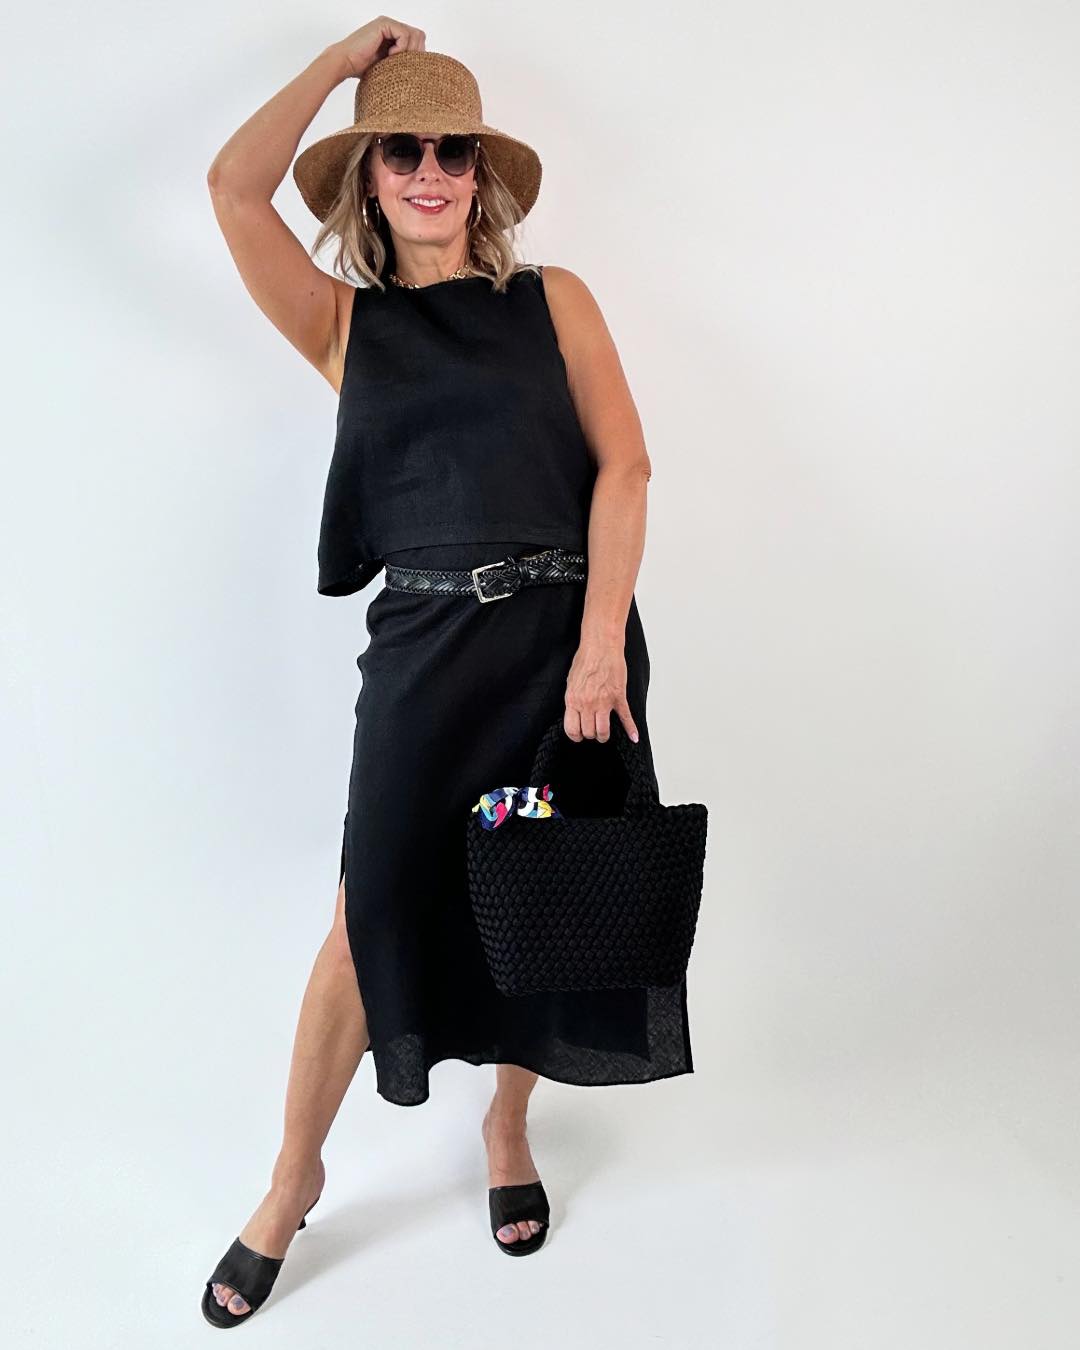 How to Wear Black in Summer